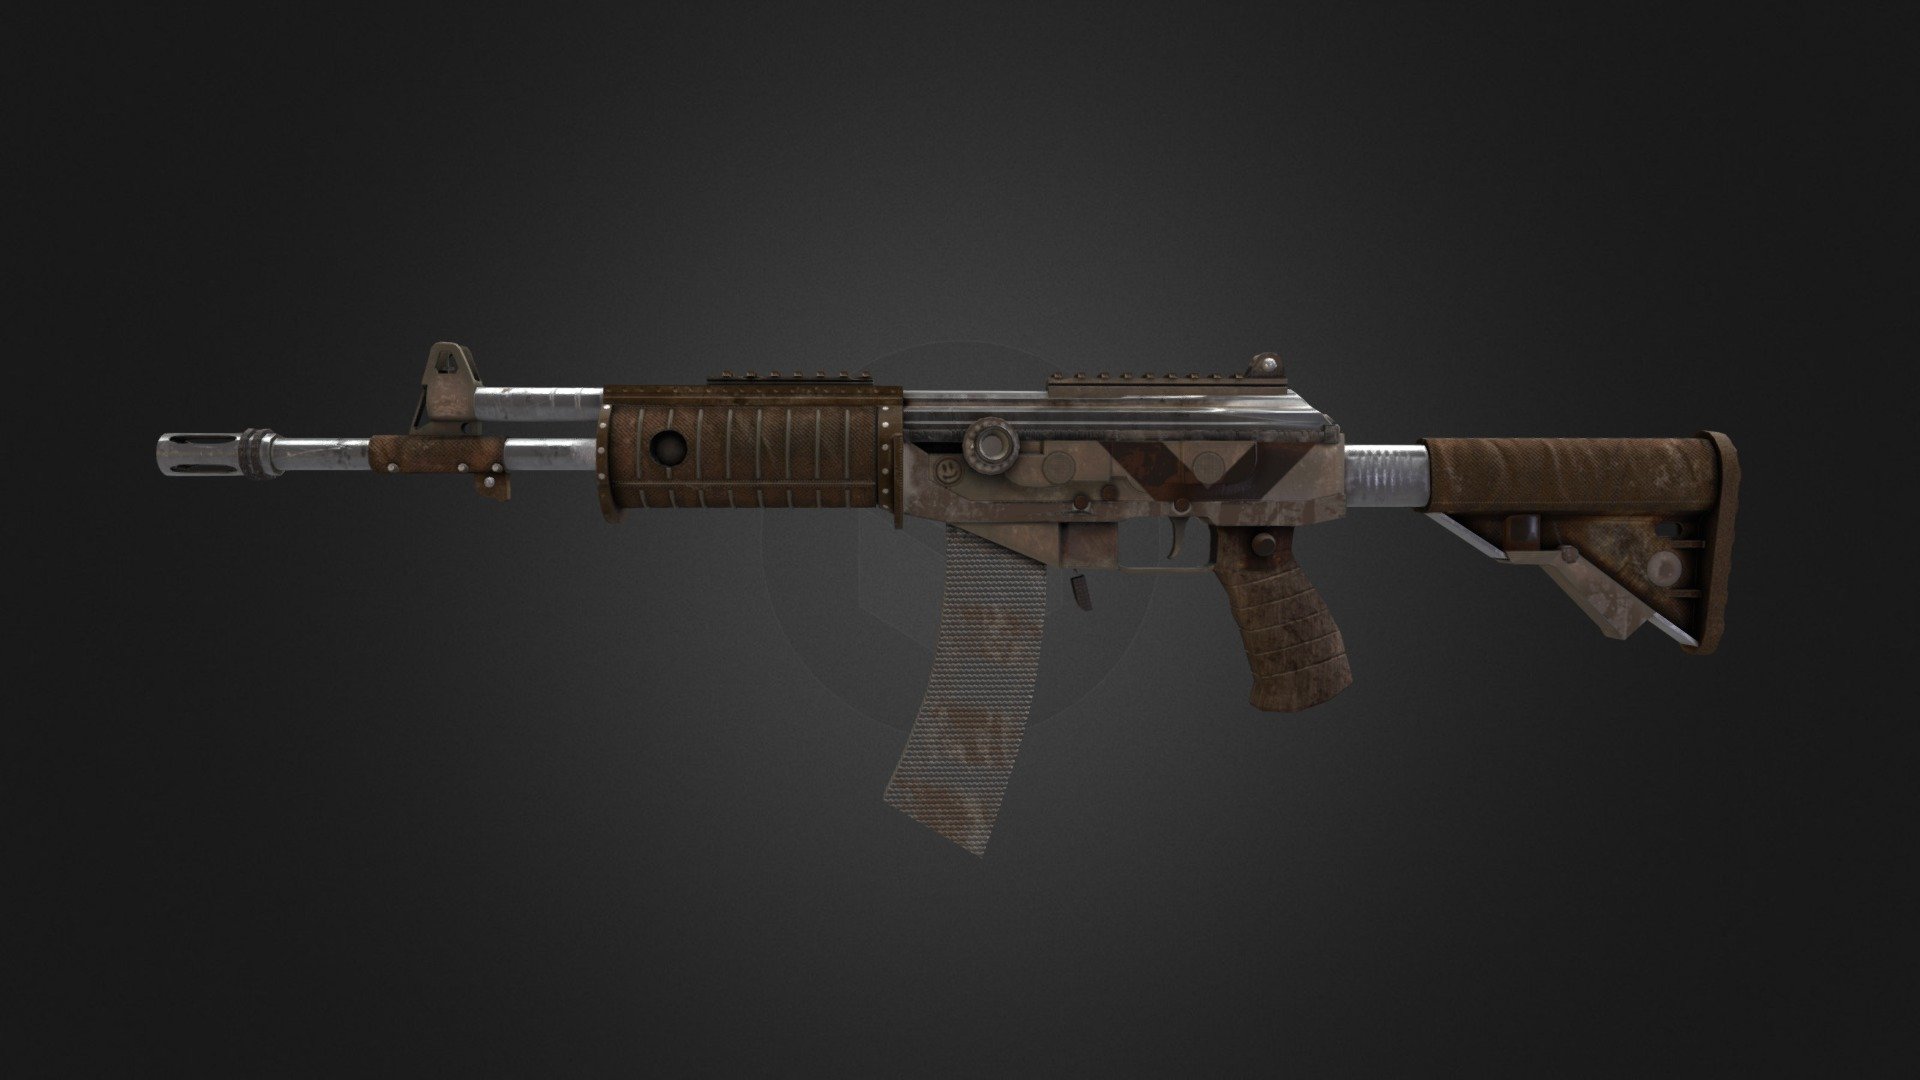 It has an old and rusty feeling to the weapon.

See more of my skins: https://steamcommunity.com/profiles/76561197996751359/myworkshopfiles/ - Galil AR | Nature of War - 3D model by Nordcrisp 3d model